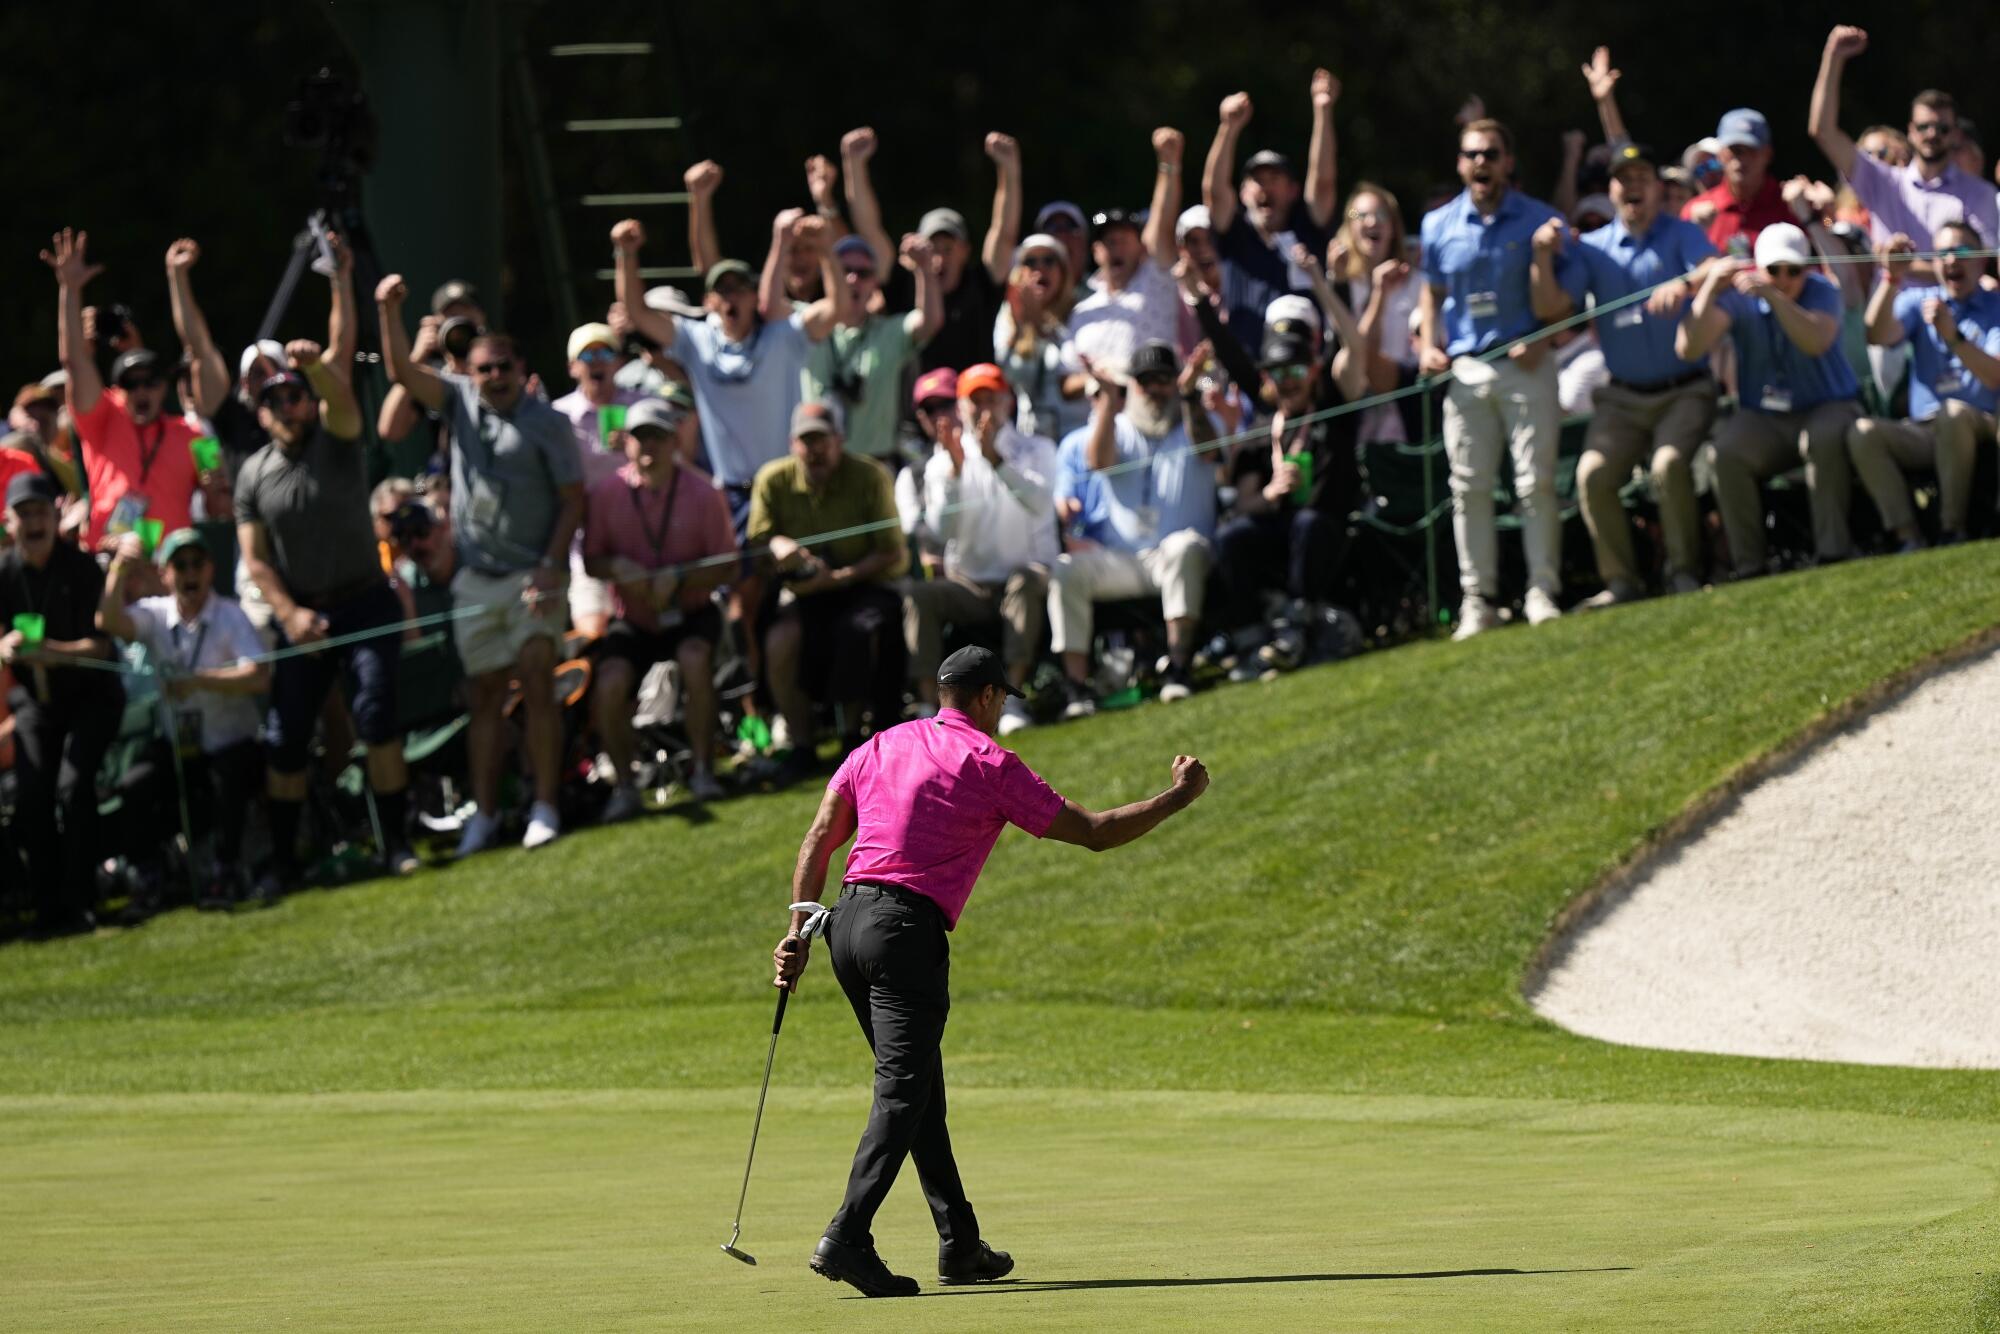 Tiger Woods pumps his fist after a birdie putt on the 16th green.